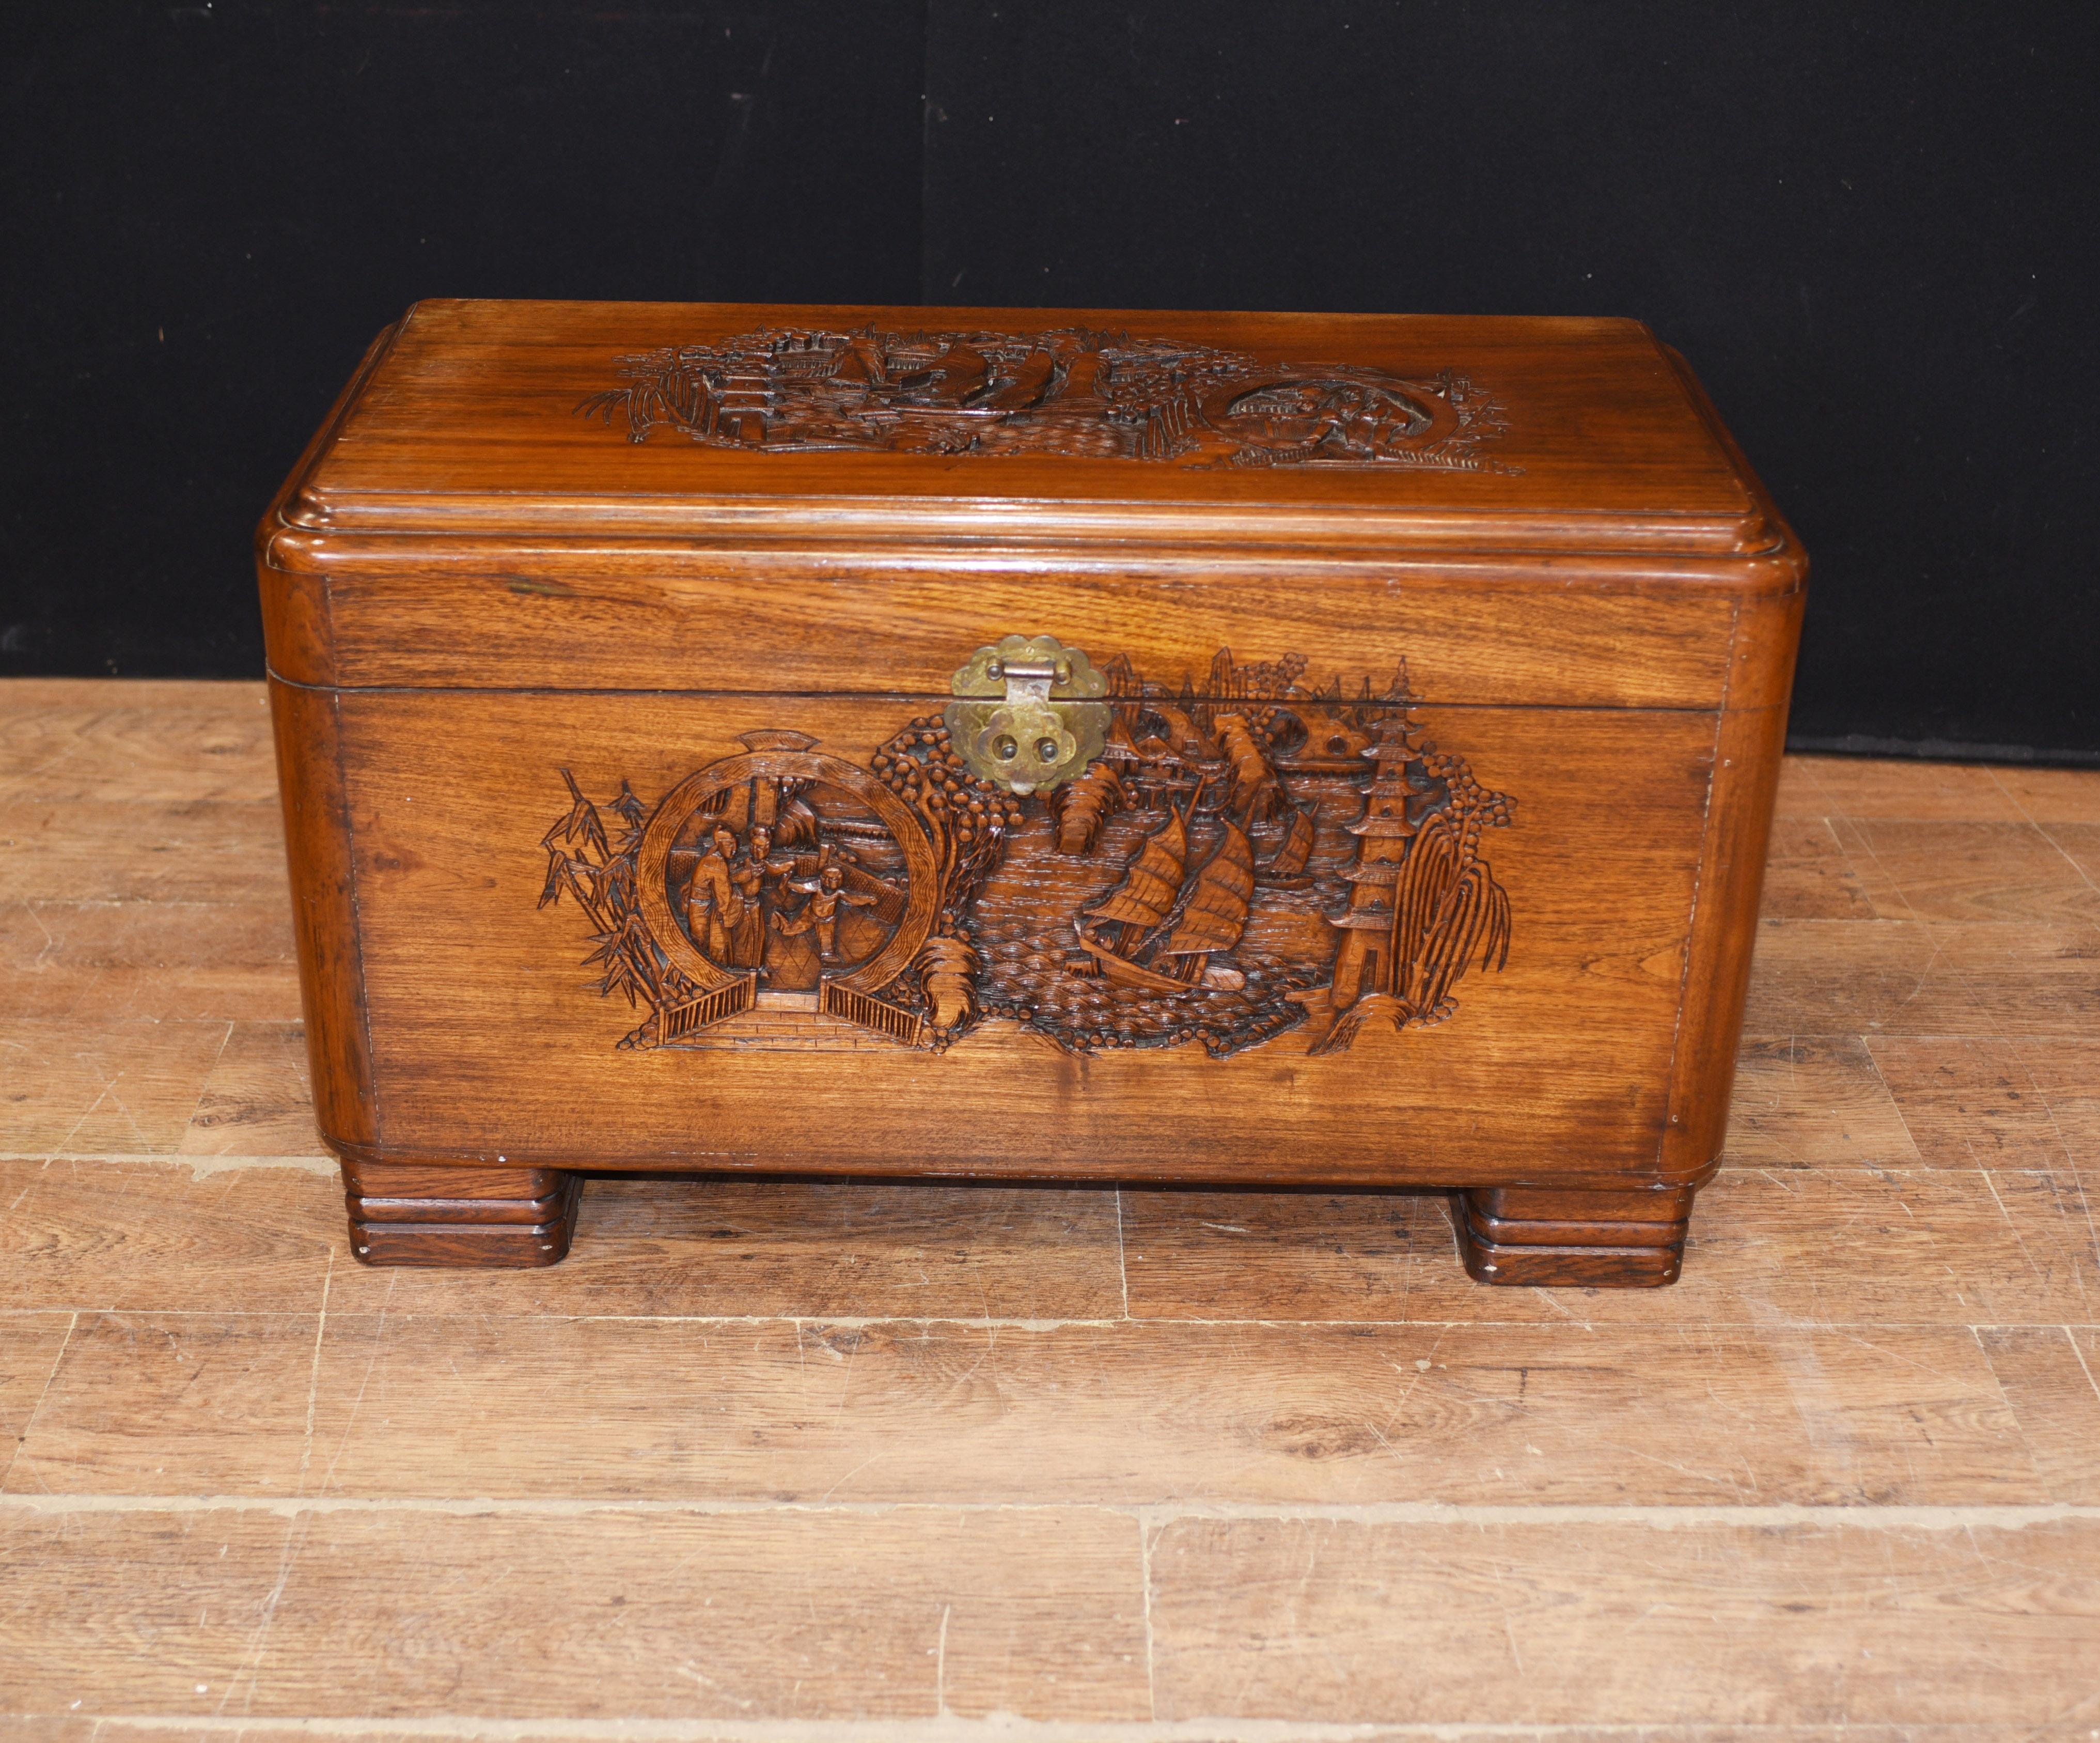 - Gorgeous antique Chinese camphor chest
- Hand carved trunk we date to circa 1920
- Great interiors piece, can function as a side or coffee table
- Viewings available by appointment
- Offered in great shape ready for home use right away
- We